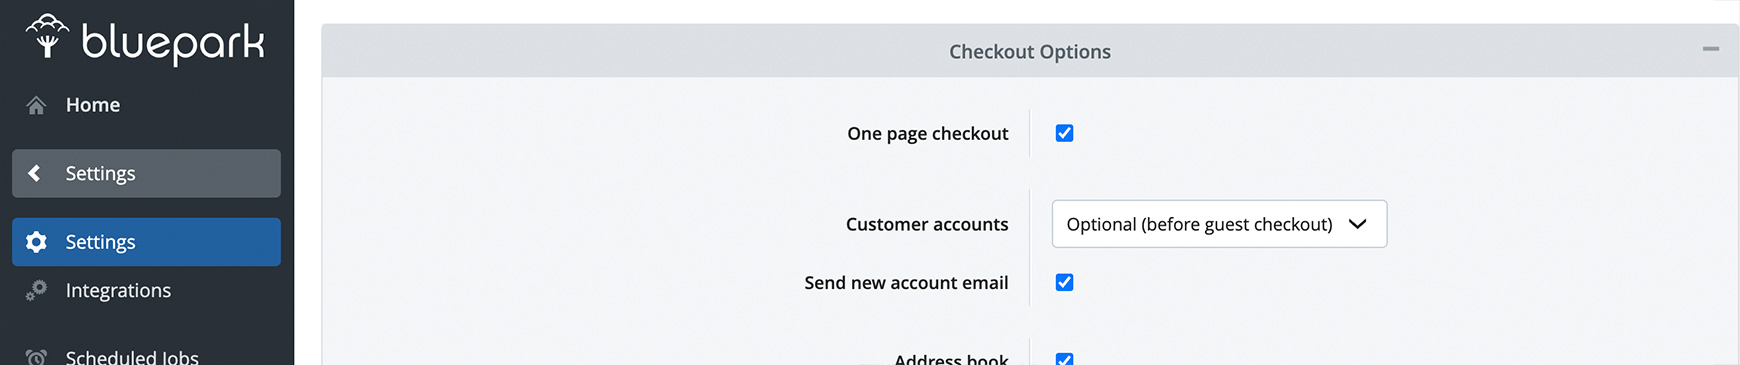 Switch on One-Page Checkout 